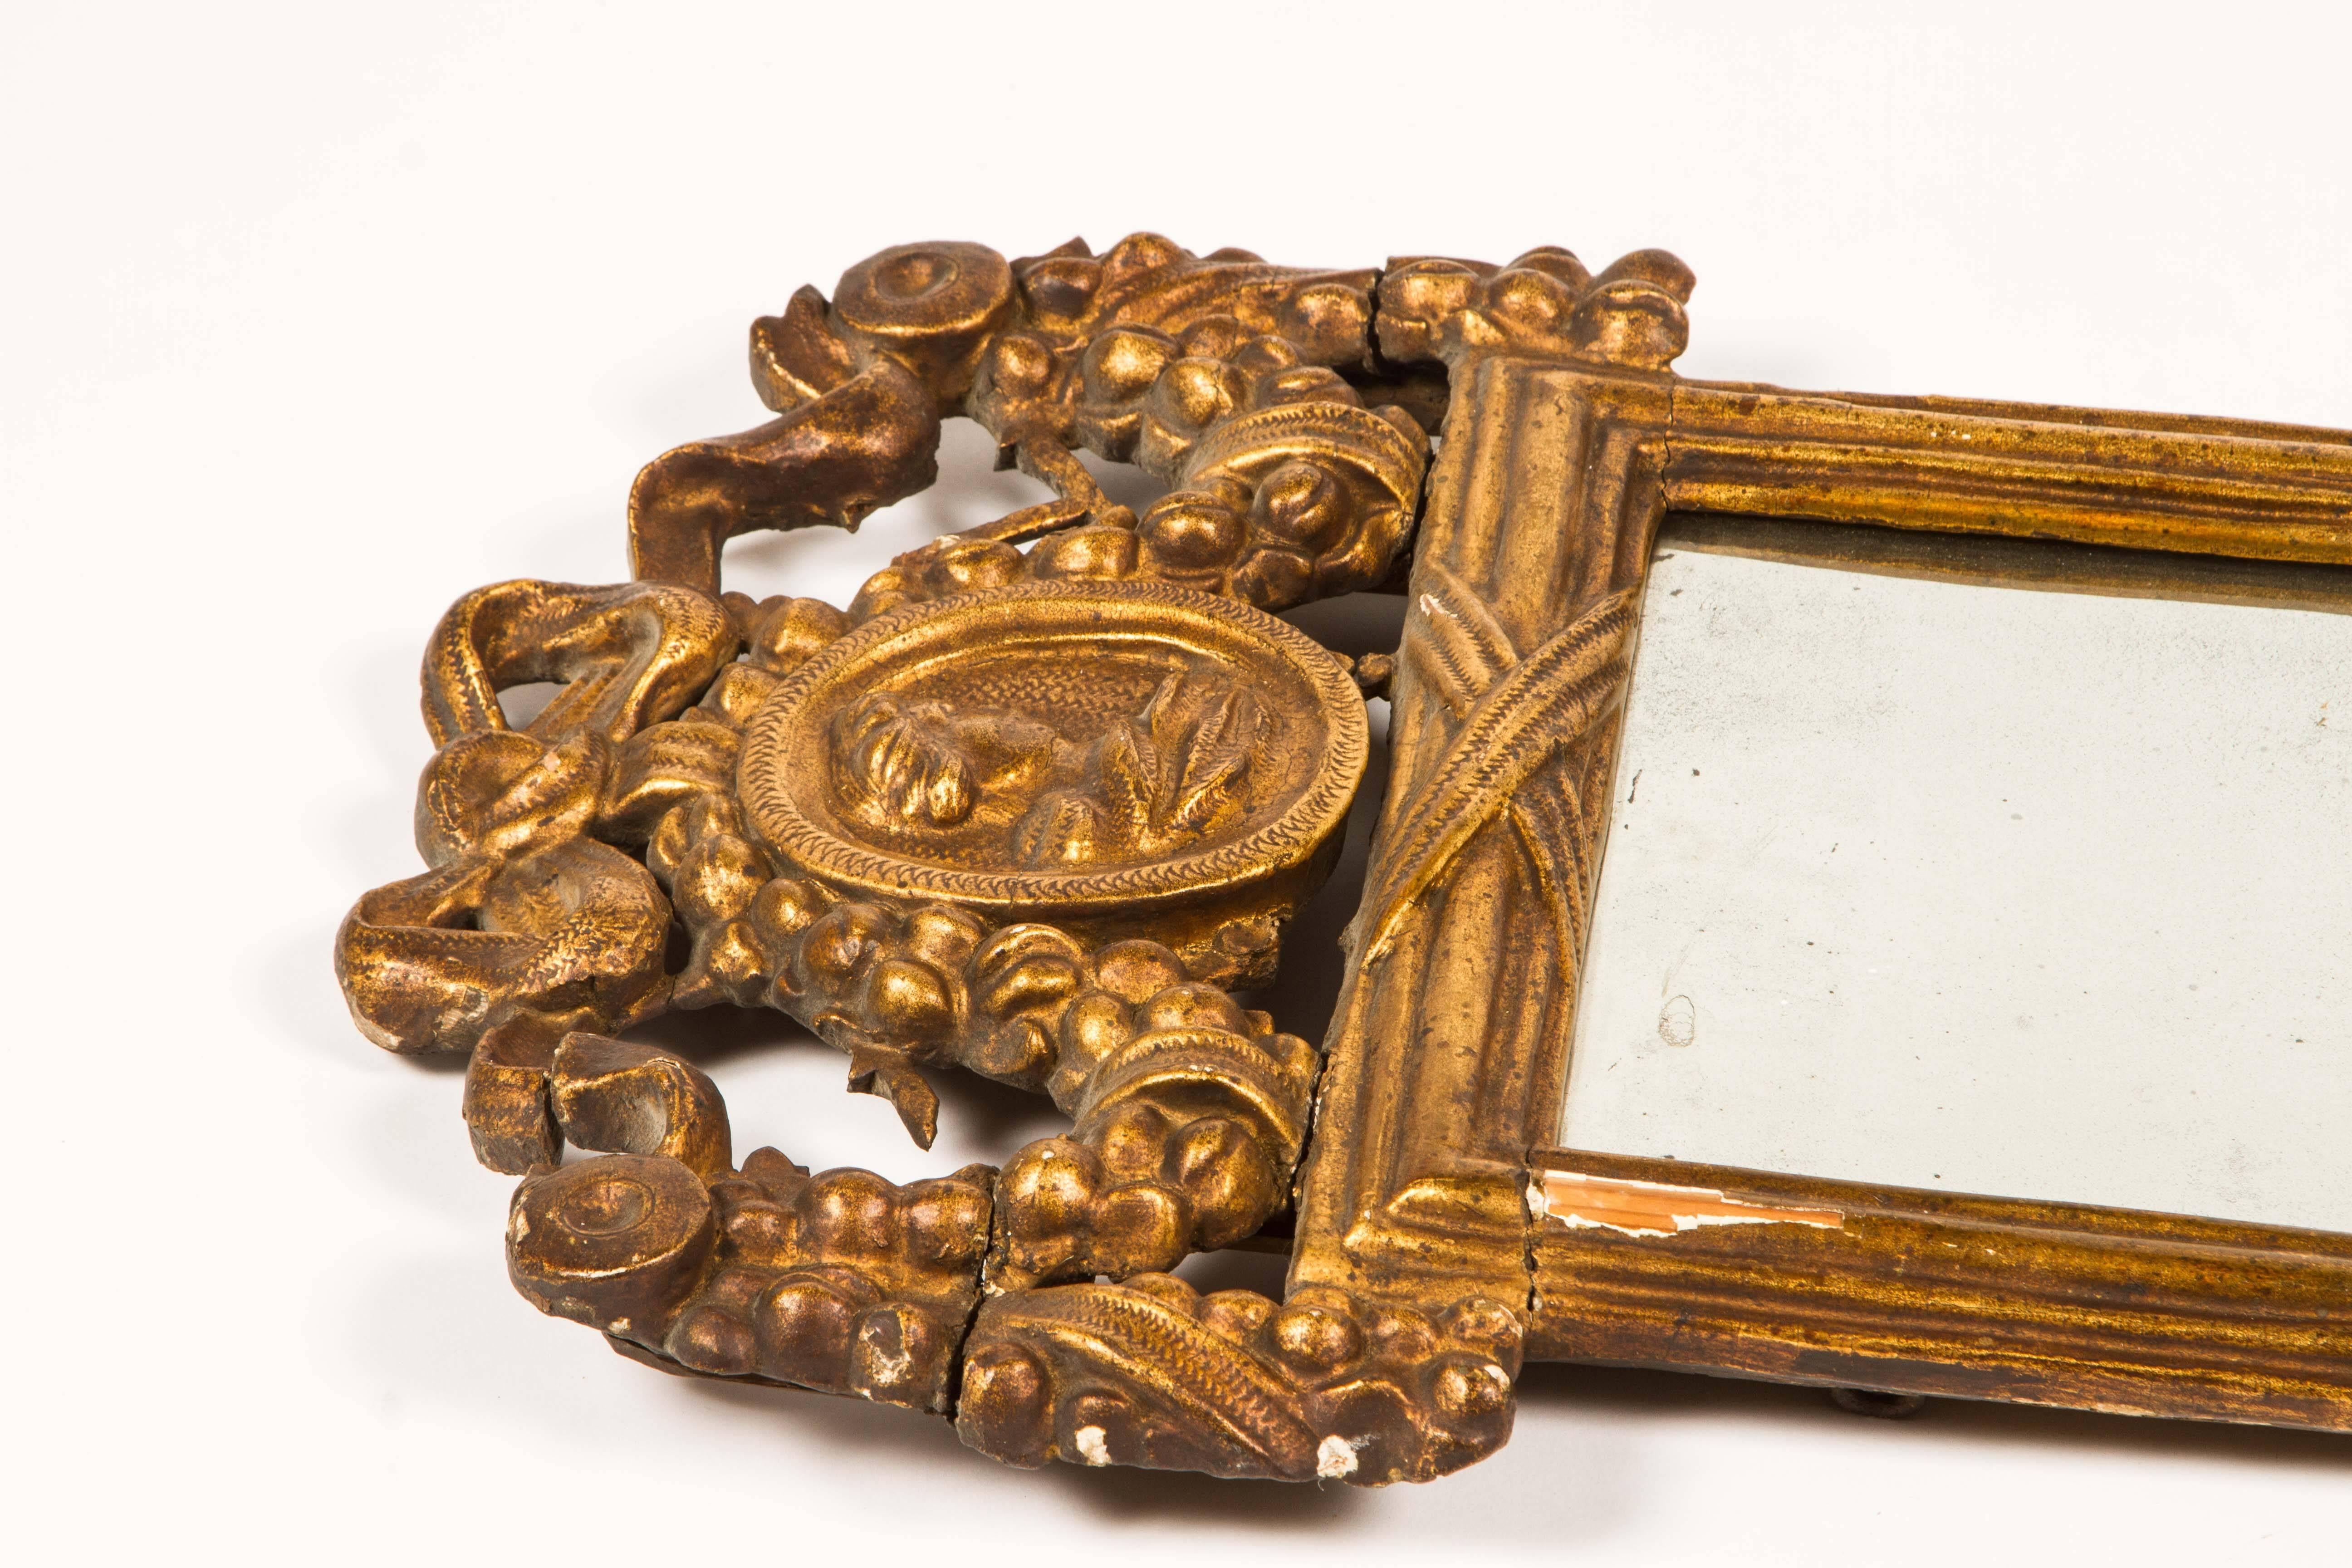 18th century Louis XVI style giltwood mirror with hand-carved embellishments featuring a portrait medallion at the pediment, and swags of ribbon and garland on the top and bottom.